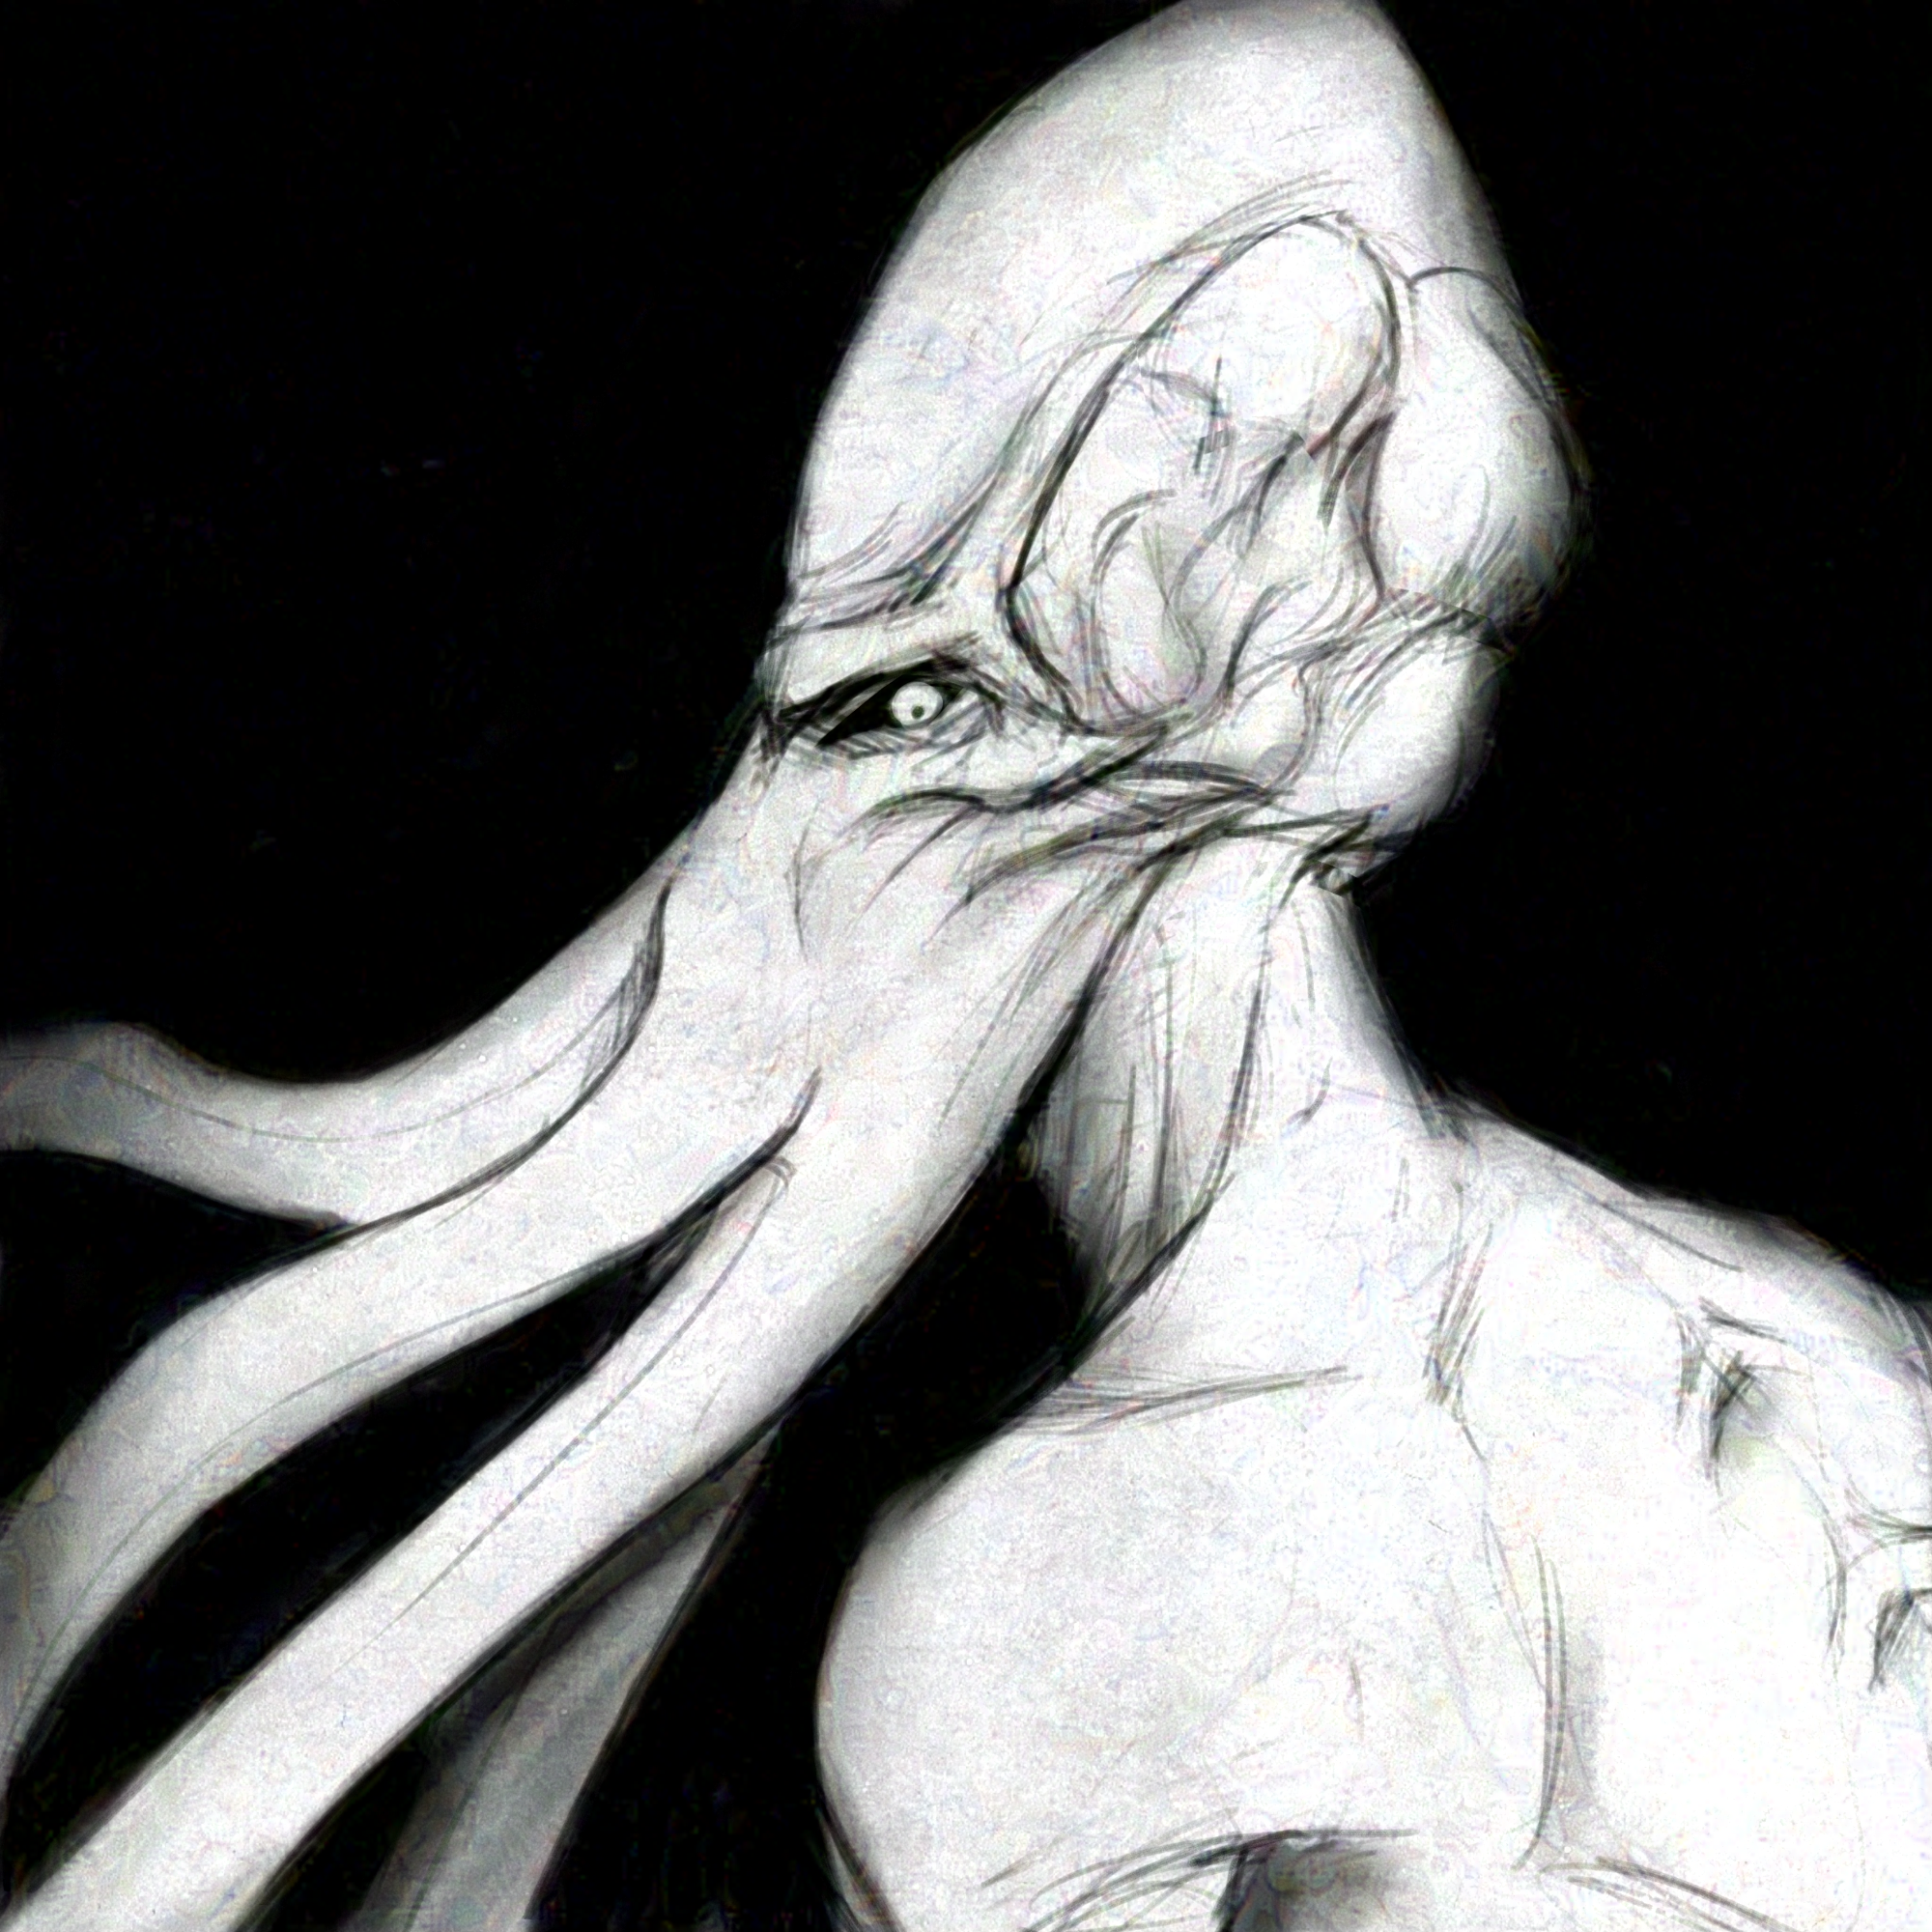 The third image of a five panel series. It's the same side view of the Emperor (an illithid) as before, but suddenly their eye has shifted to the side to directly look at you.